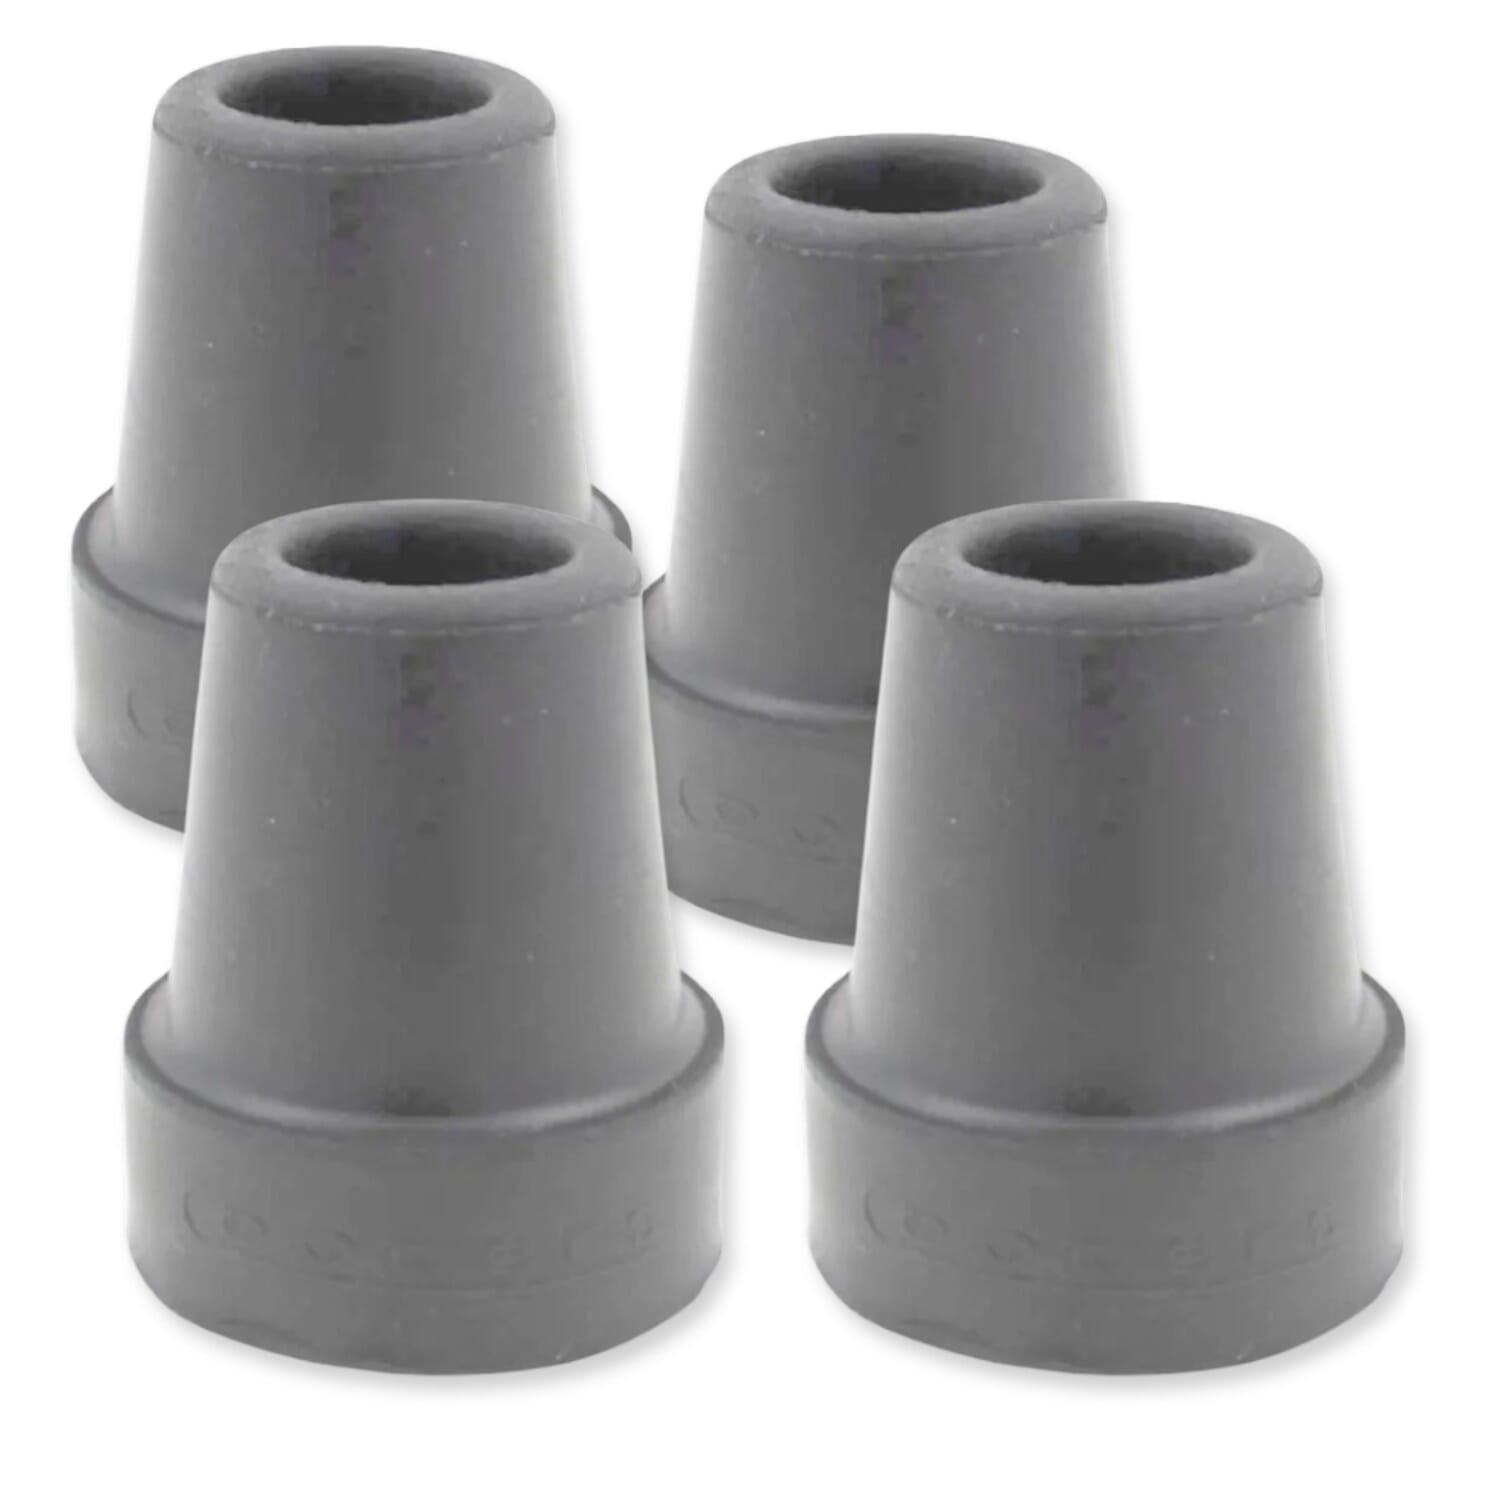 View Rubber Ends For Walking Sticks Rubber Ferrules 28mm grey pack of 4 information